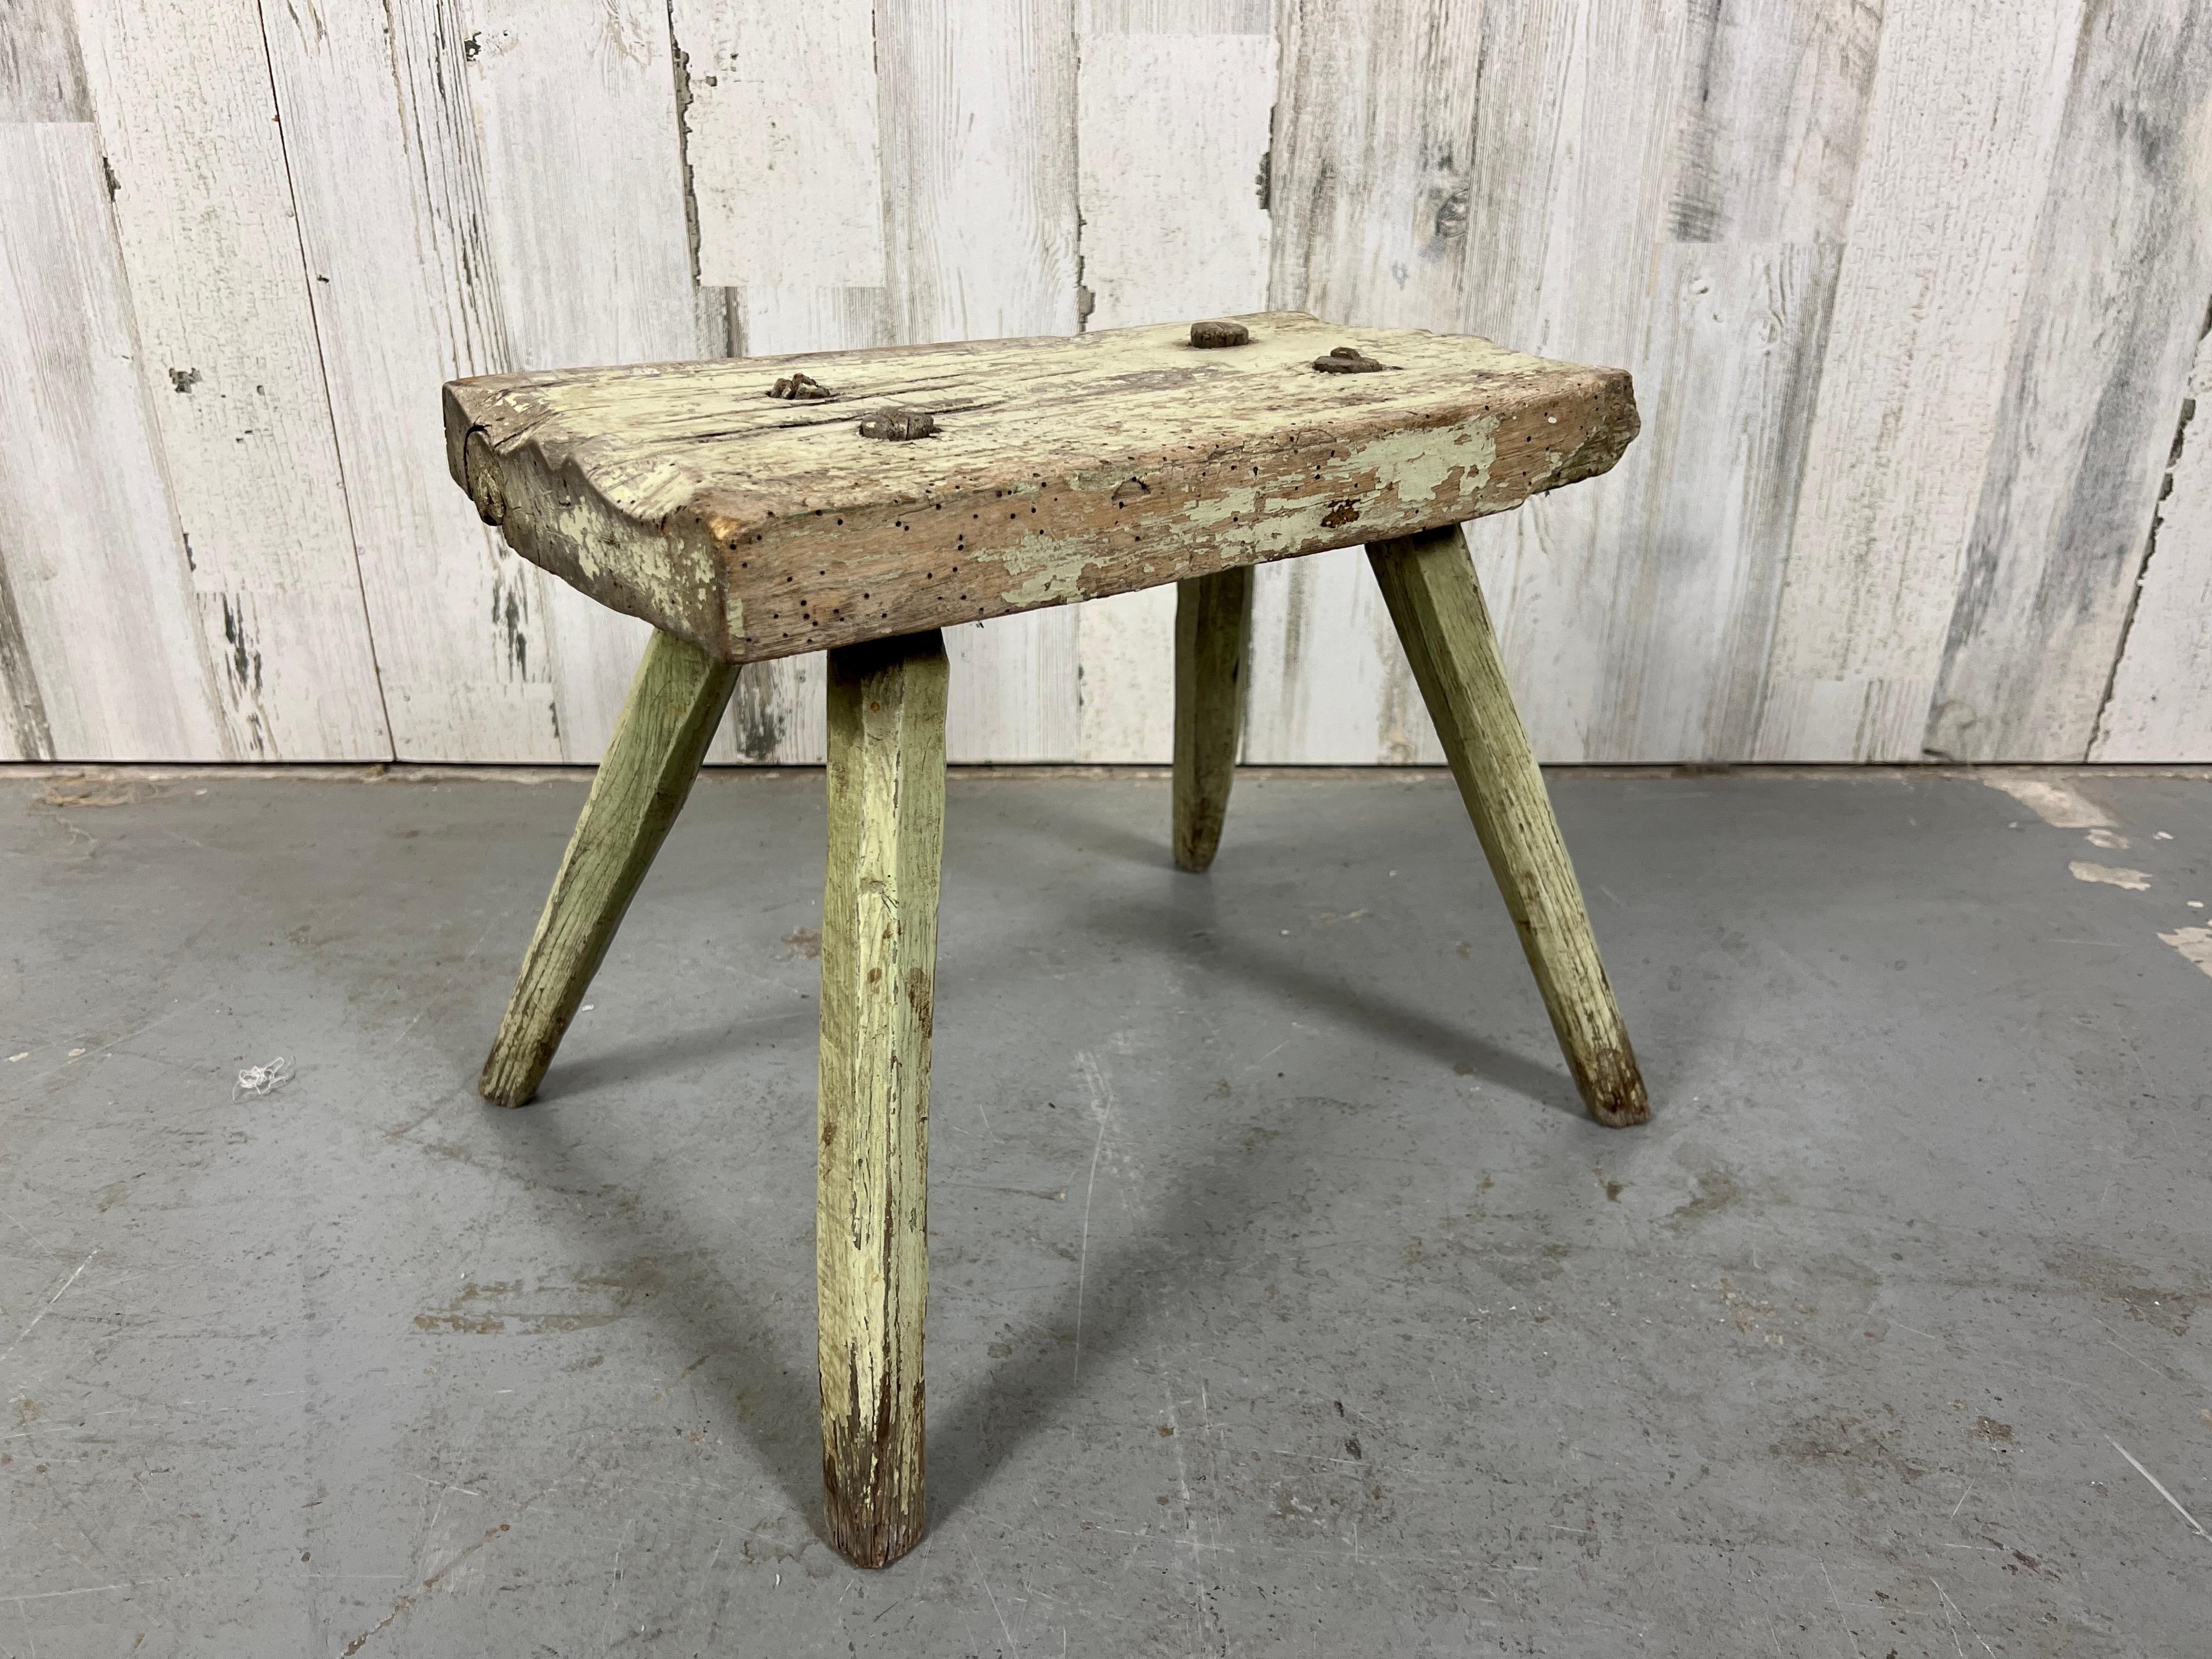 Very rustic hardwood milking stool with original milk paint in a mossy green. This would also make a great drinks table.